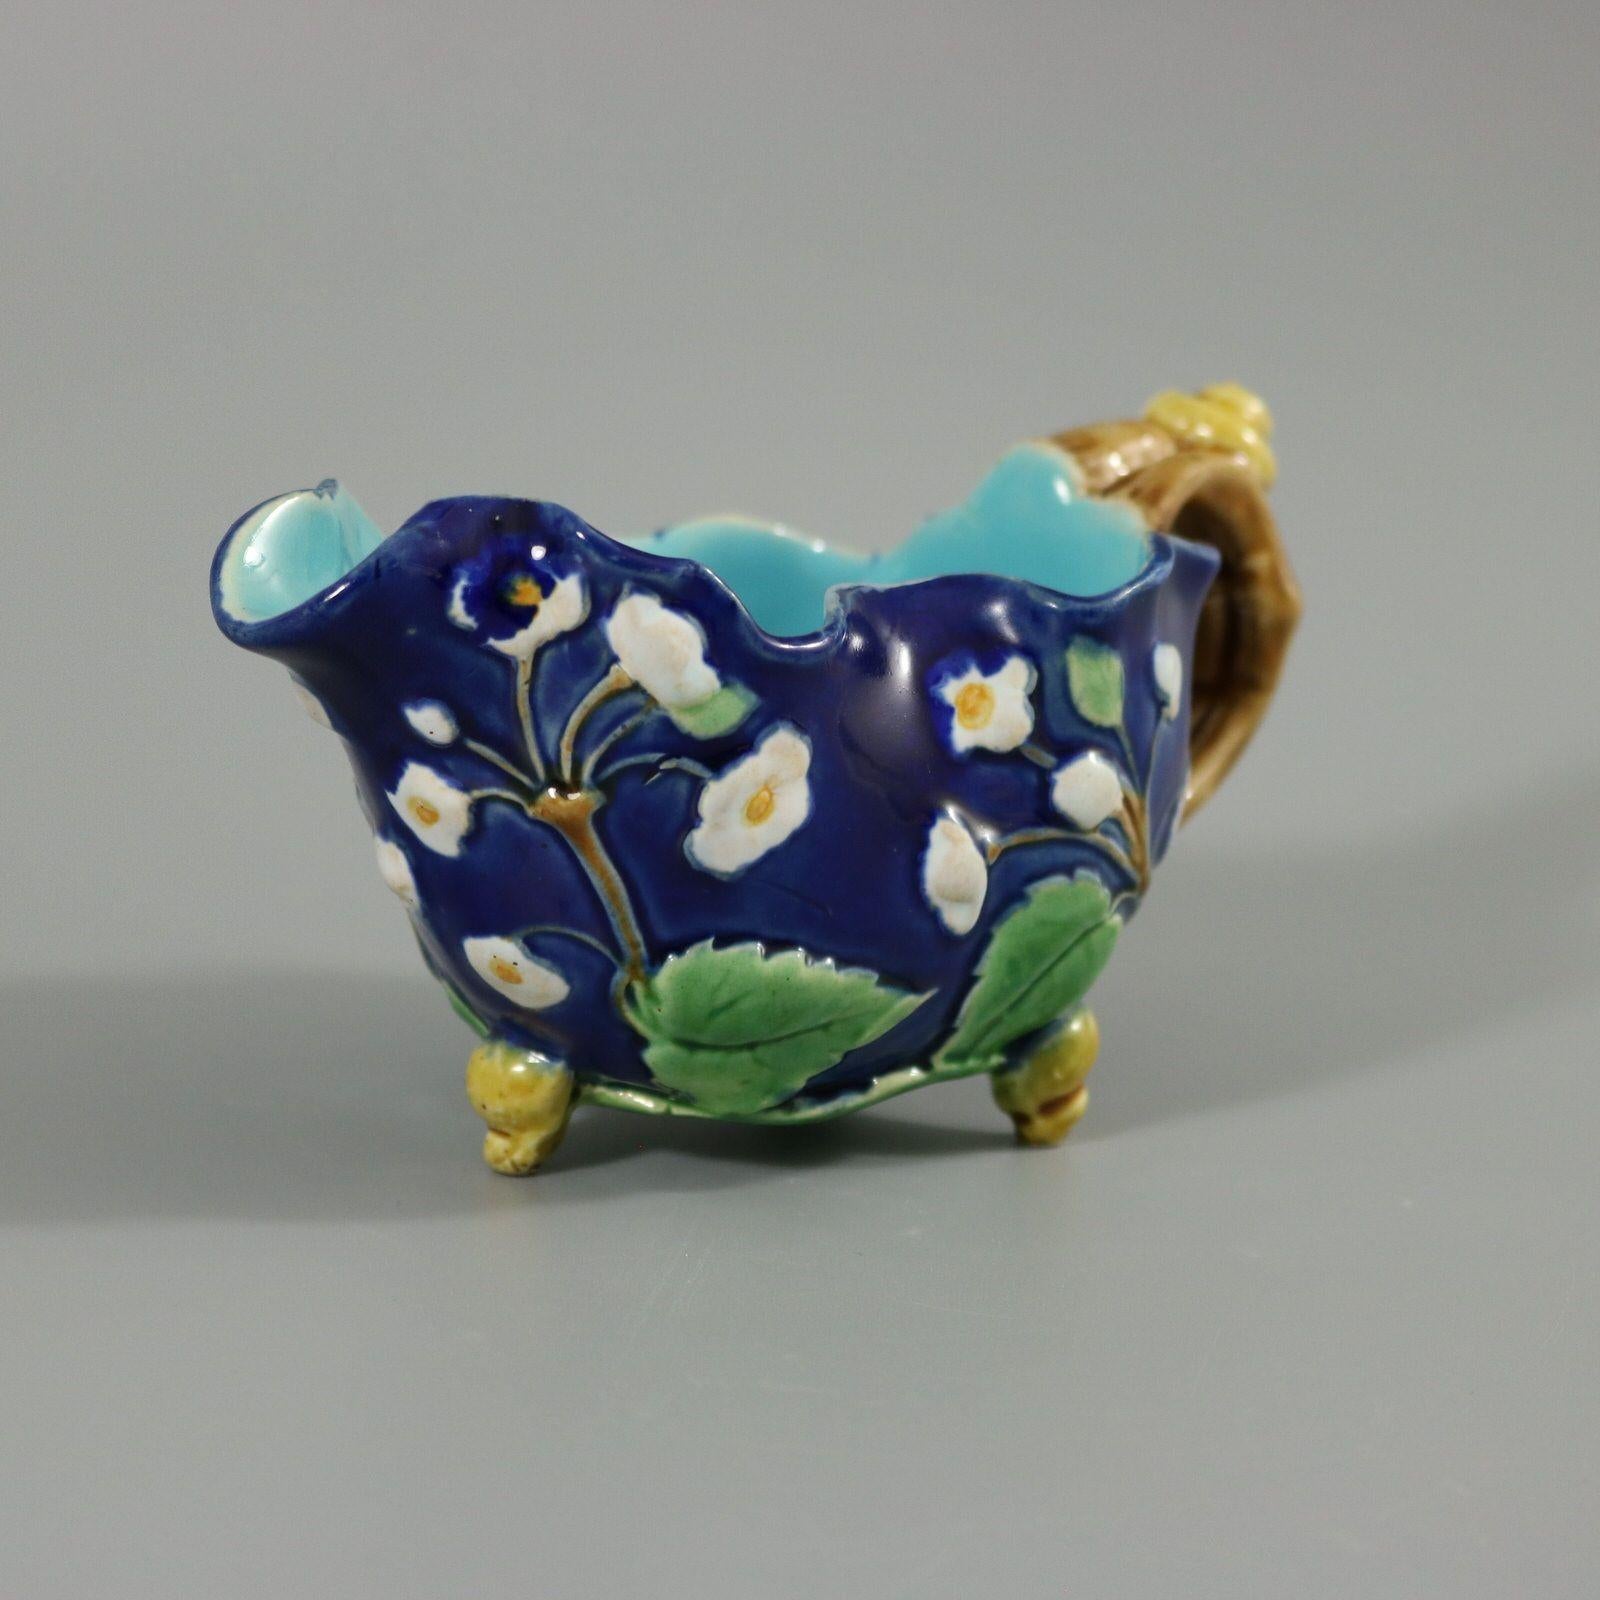 Minton Majolica creamer which features a blossoming branch, snail shell on handle and feet. Cobalt blue ground version. Colouration: cobalt blue, green, white, are predominant. The piece bears maker's marks for the Minton pottery. Bears a pattern